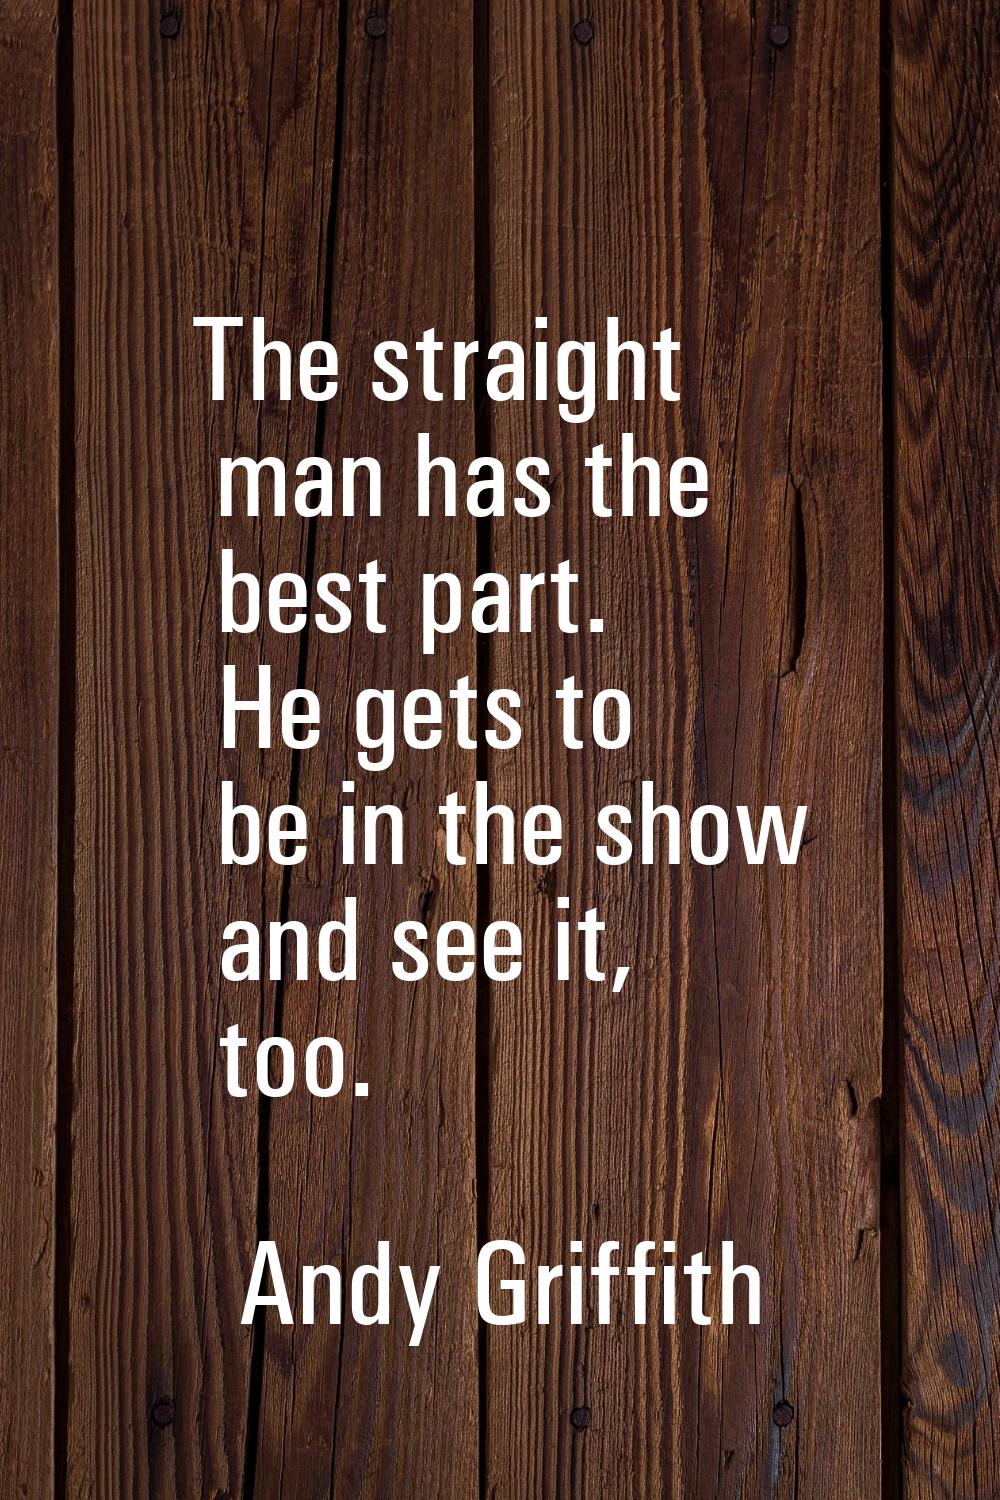 The straight man has the best part. He gets to be in the show and see it, too.